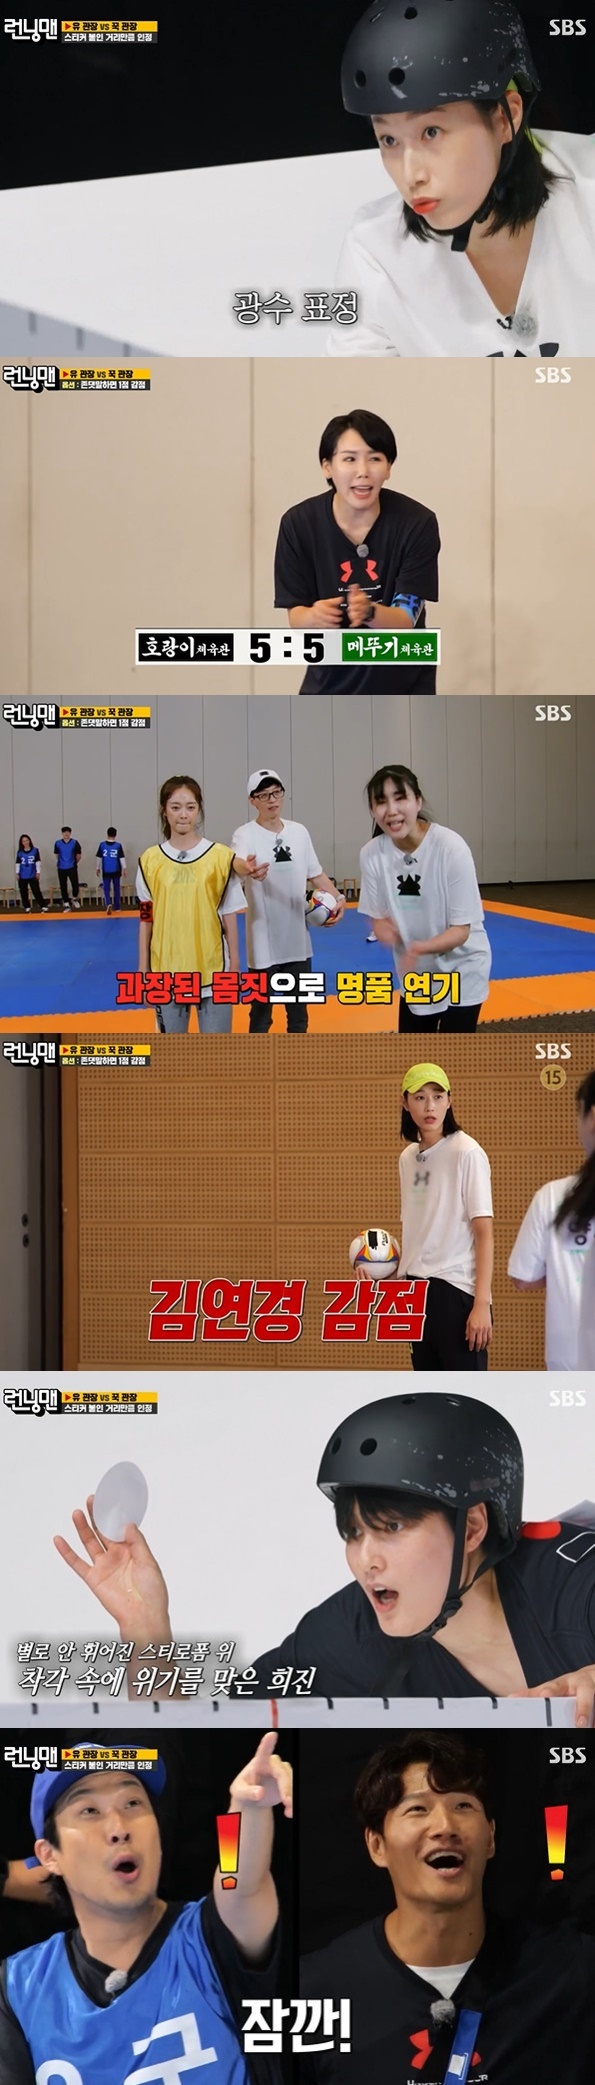 Seoul = = Volleyball player Kim Yeon-koung gave a laugh at the variety entertainment Running Man with a different charm.On the afternoon of the 3rd, SBS entertainment program Running Man appeared with the volleyball national team Kim Yeon-koung, Oh Ji-young, Yeum Hye-Seon, Kim Hee-jin, Lee So-young, Ahn Hye-jin and Park Eun-jin.Unlike the main focus of sports players broadcast appearances on talk shows and observation programs, Running Man has discovered a new attraction of players in the genre of variety.The members relaxed the players with a pleasant and comfortable atmosphere, and they laughed at each character from the players.Yeum Hye-Seon, who claims to have a nickname of salting when blocking, claims that the ball was not right even when it was blocked, showed a salting aspect in the footwear Kyonggi with the Running Man.He appealed with a really unfair look, but the same team members laughed at Yeum Hye-Seons claim.In addition, unexpected scenes such as Oh Ji-young, who is more skillful than Running Man, and Kim Hee-jin, who was frightened by the interference of Running Man in Game, attracted attention.Among them, Kim Yeon-koung brought out the members admiration with the ability to optimize variety and the entertainment sense beyond expectation.When I was performing the mission on the Styrofoam bridge, I was scared and laughed, saying, I am a bird or how I fly, I am making a crazy sound.Scared Kim Yeon-koung failed to manage his facial expressions and the members said, Kwangsoo facial expressions. I missed you! Kwangsoo!The former members said that Kwangsoo and Kim Yeon-koung resemble each other. After completing Kyonggi, Yoo Jae-Suk said, I found Kwangsoos successor.Everything is perfect from the height, he said, pleased.Also, when negotiating an annual salary, Yoo Jae-Suk boasted of his dedication to losing his words.The other team gives 300,000 Ones, that team does 300,000 Ones, and I will do only 130,000 Ones, he said.Yoo Jae-Suk laughed at Kim Yeon-koungs claim that he was driving without a mind, saying, Are you Kwangsoo?Kim Yeon-koung was more excited when the Running Man members complained about the team leader of each team, Yoo Jae-Suk and Kim Jong Kook.Ji Suk-jin and Haha were amazed that they could see this Kwangsoo in this appearance.Ji Suk-jin was delighted to pose a needless cross which Lee Kwang-soo had not done since getting off.Volleyball players, including the Tokyo Organizing Committee of the Olympic and later Kim Yeon-koung, appeared on various entertainment programs and met with viewers.If it was a place to share the Olympic behind-the-scenes story, Running Man had a different fun by conveying the lively and pleasant charm of the athletes.